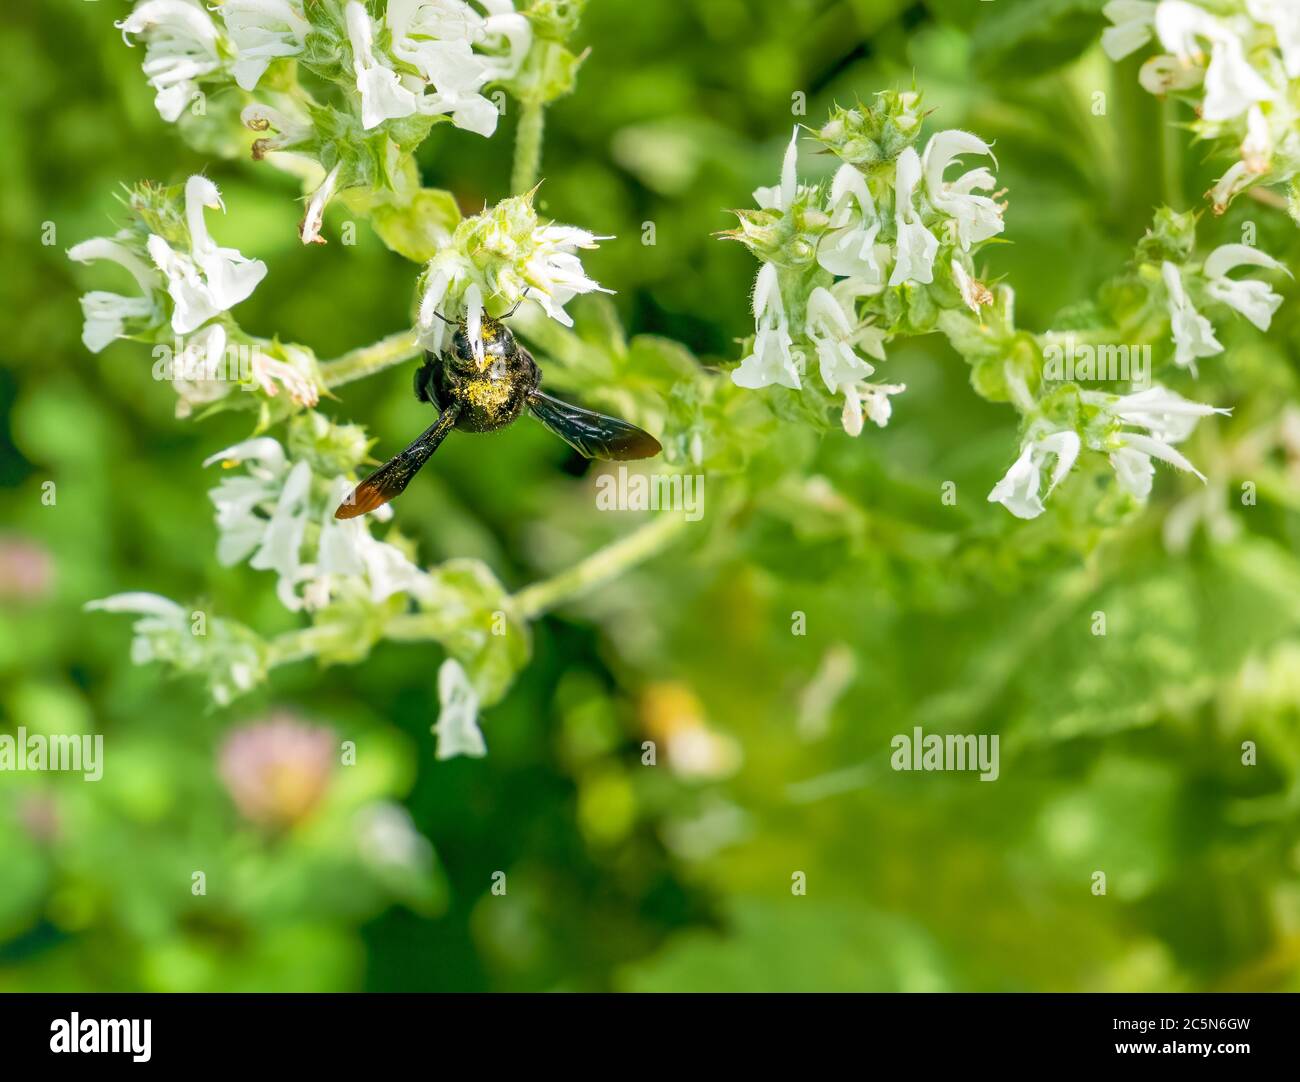 A bumblebee pollinating white flower Salvia aethiopis also known as Mediterranean or African sage. Stock Photo